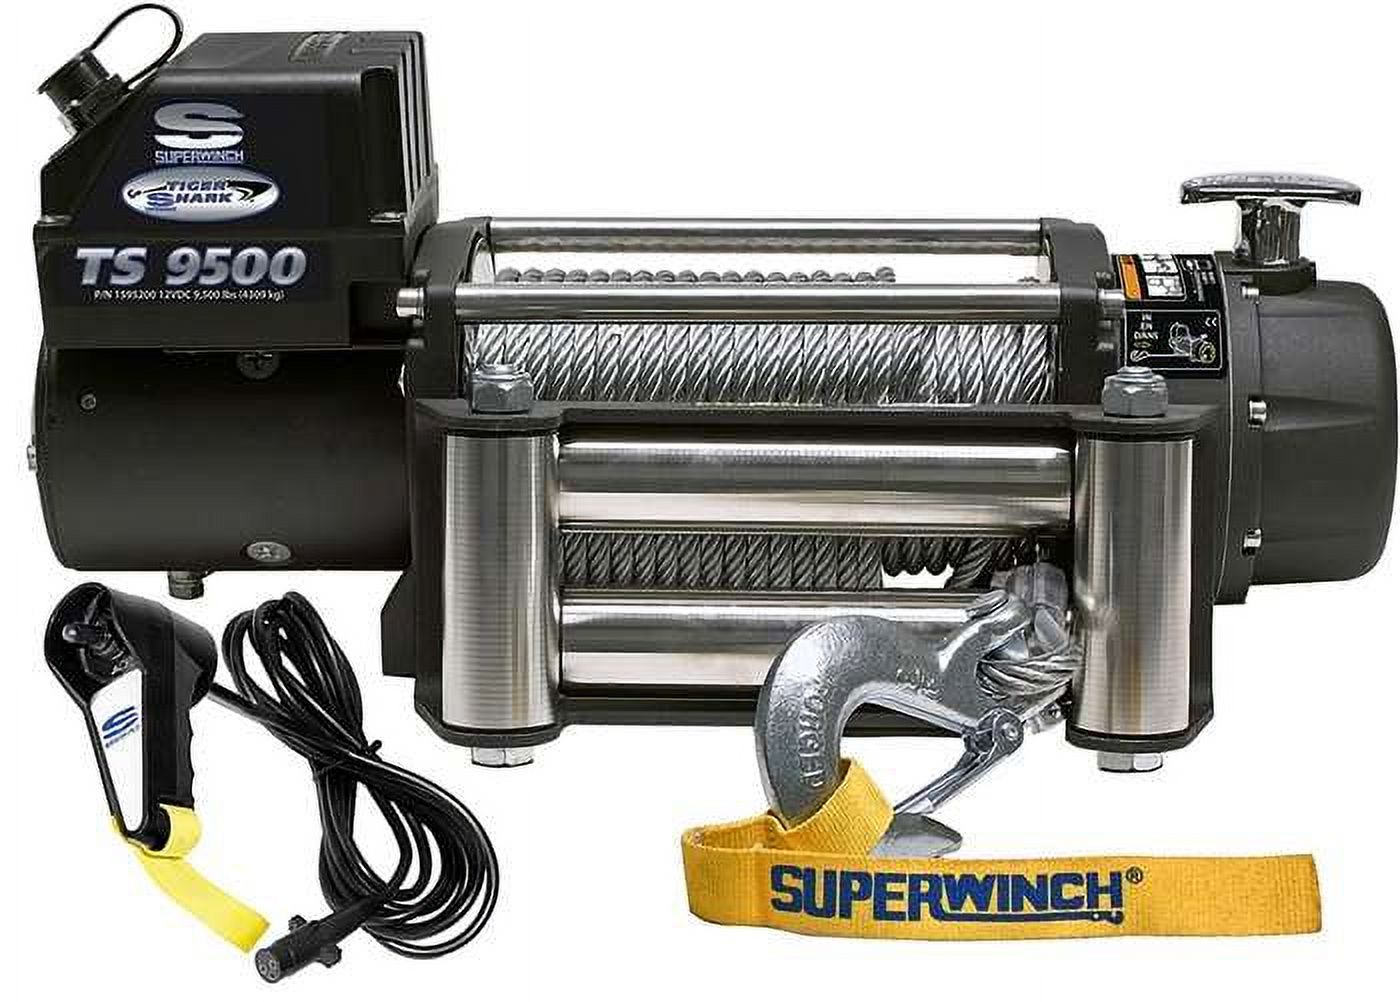 Superwinch 9500 LBS 12V DC 11/32in x 95ft Steel Rope Tiger Shark 9500 Winch - image 1 of 2